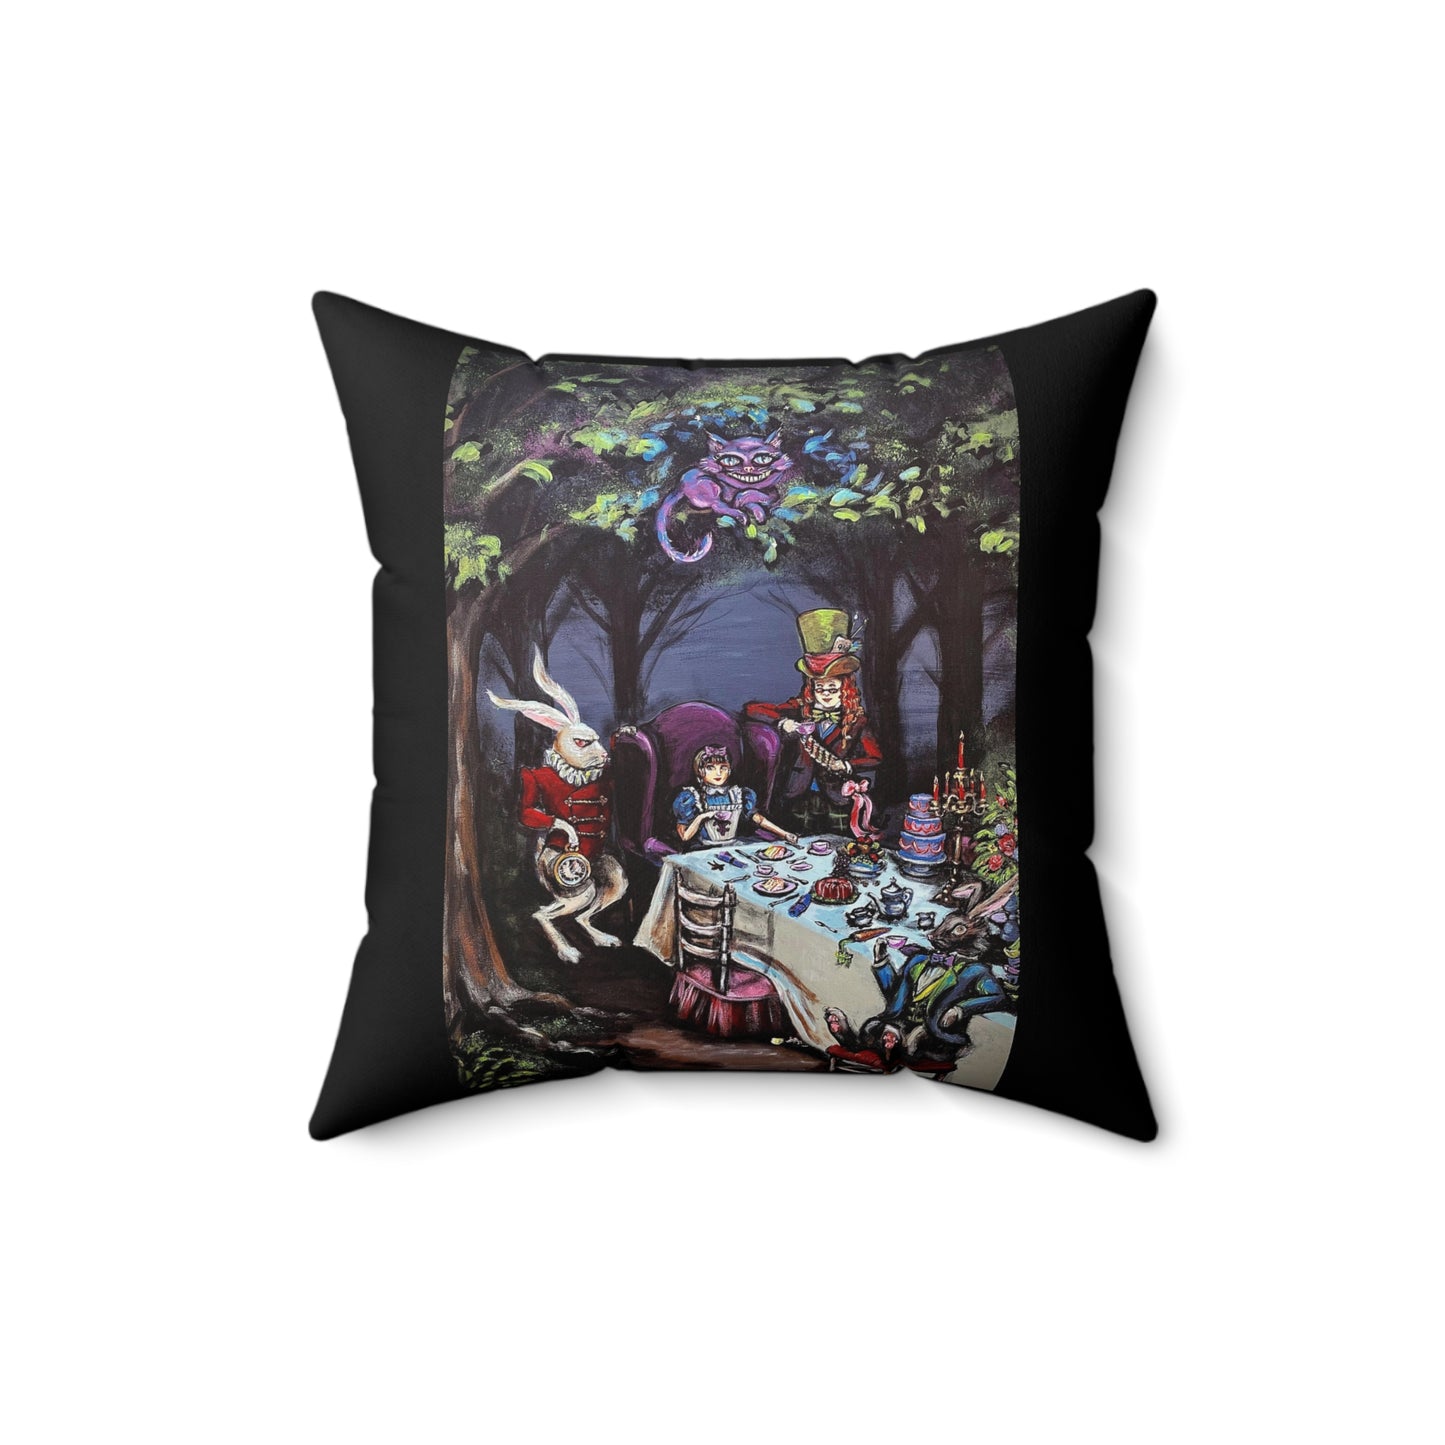 Scared & Alone Richard-Lael Lillard's "Mad Hatter's Tea Party" Square Gallery Pillow